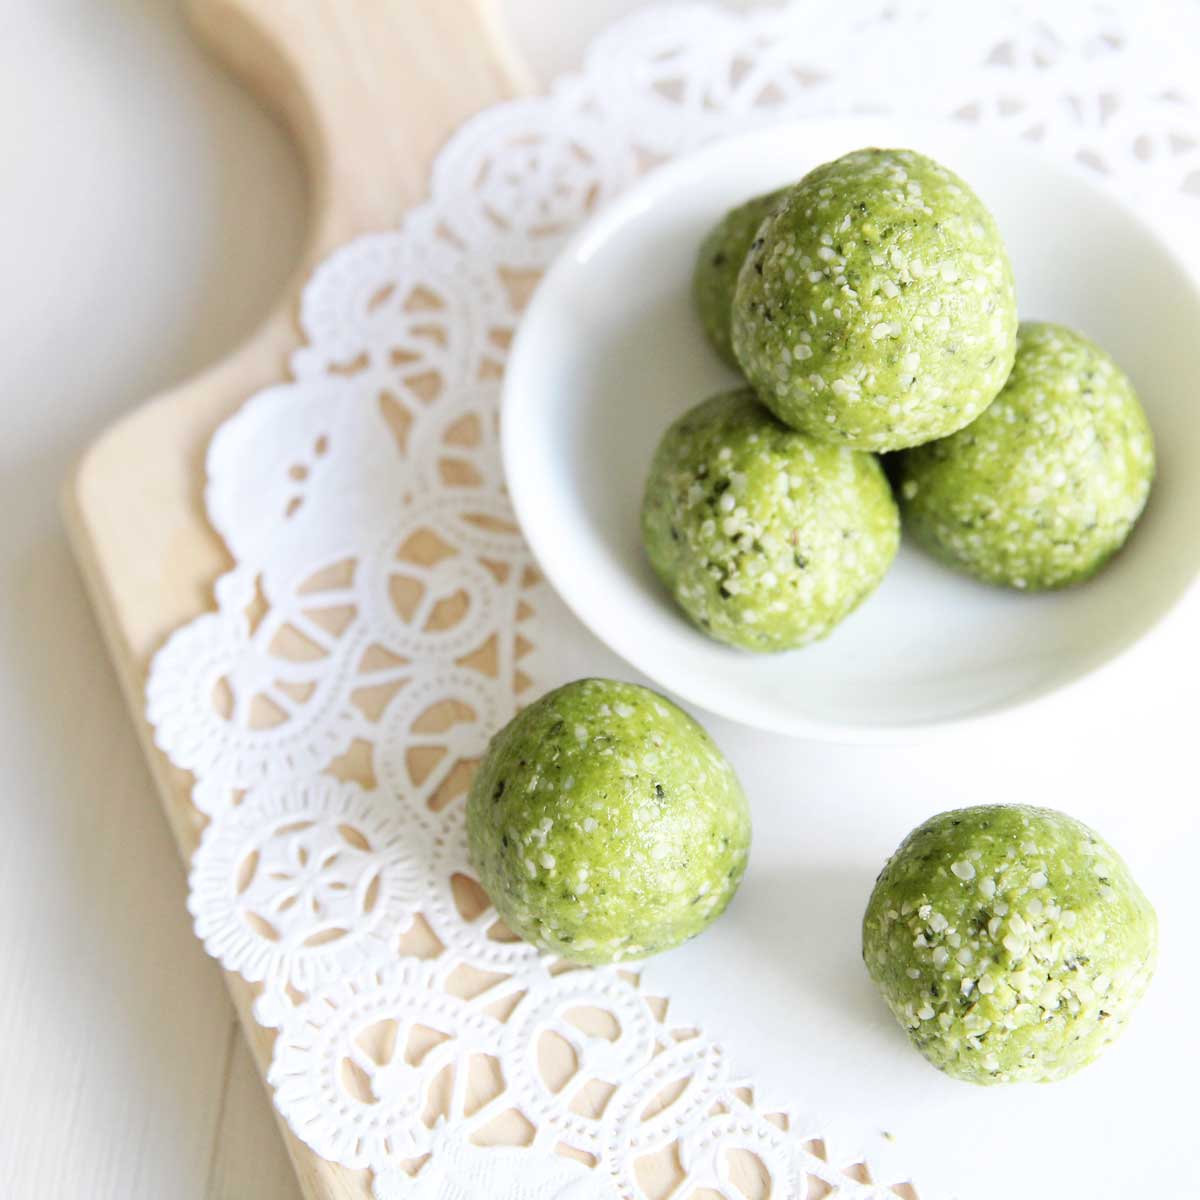 Power Packed Matcha Latte Protein Balls Recipe with Collagen Peptides - Sweet Matcha Whipped Cream